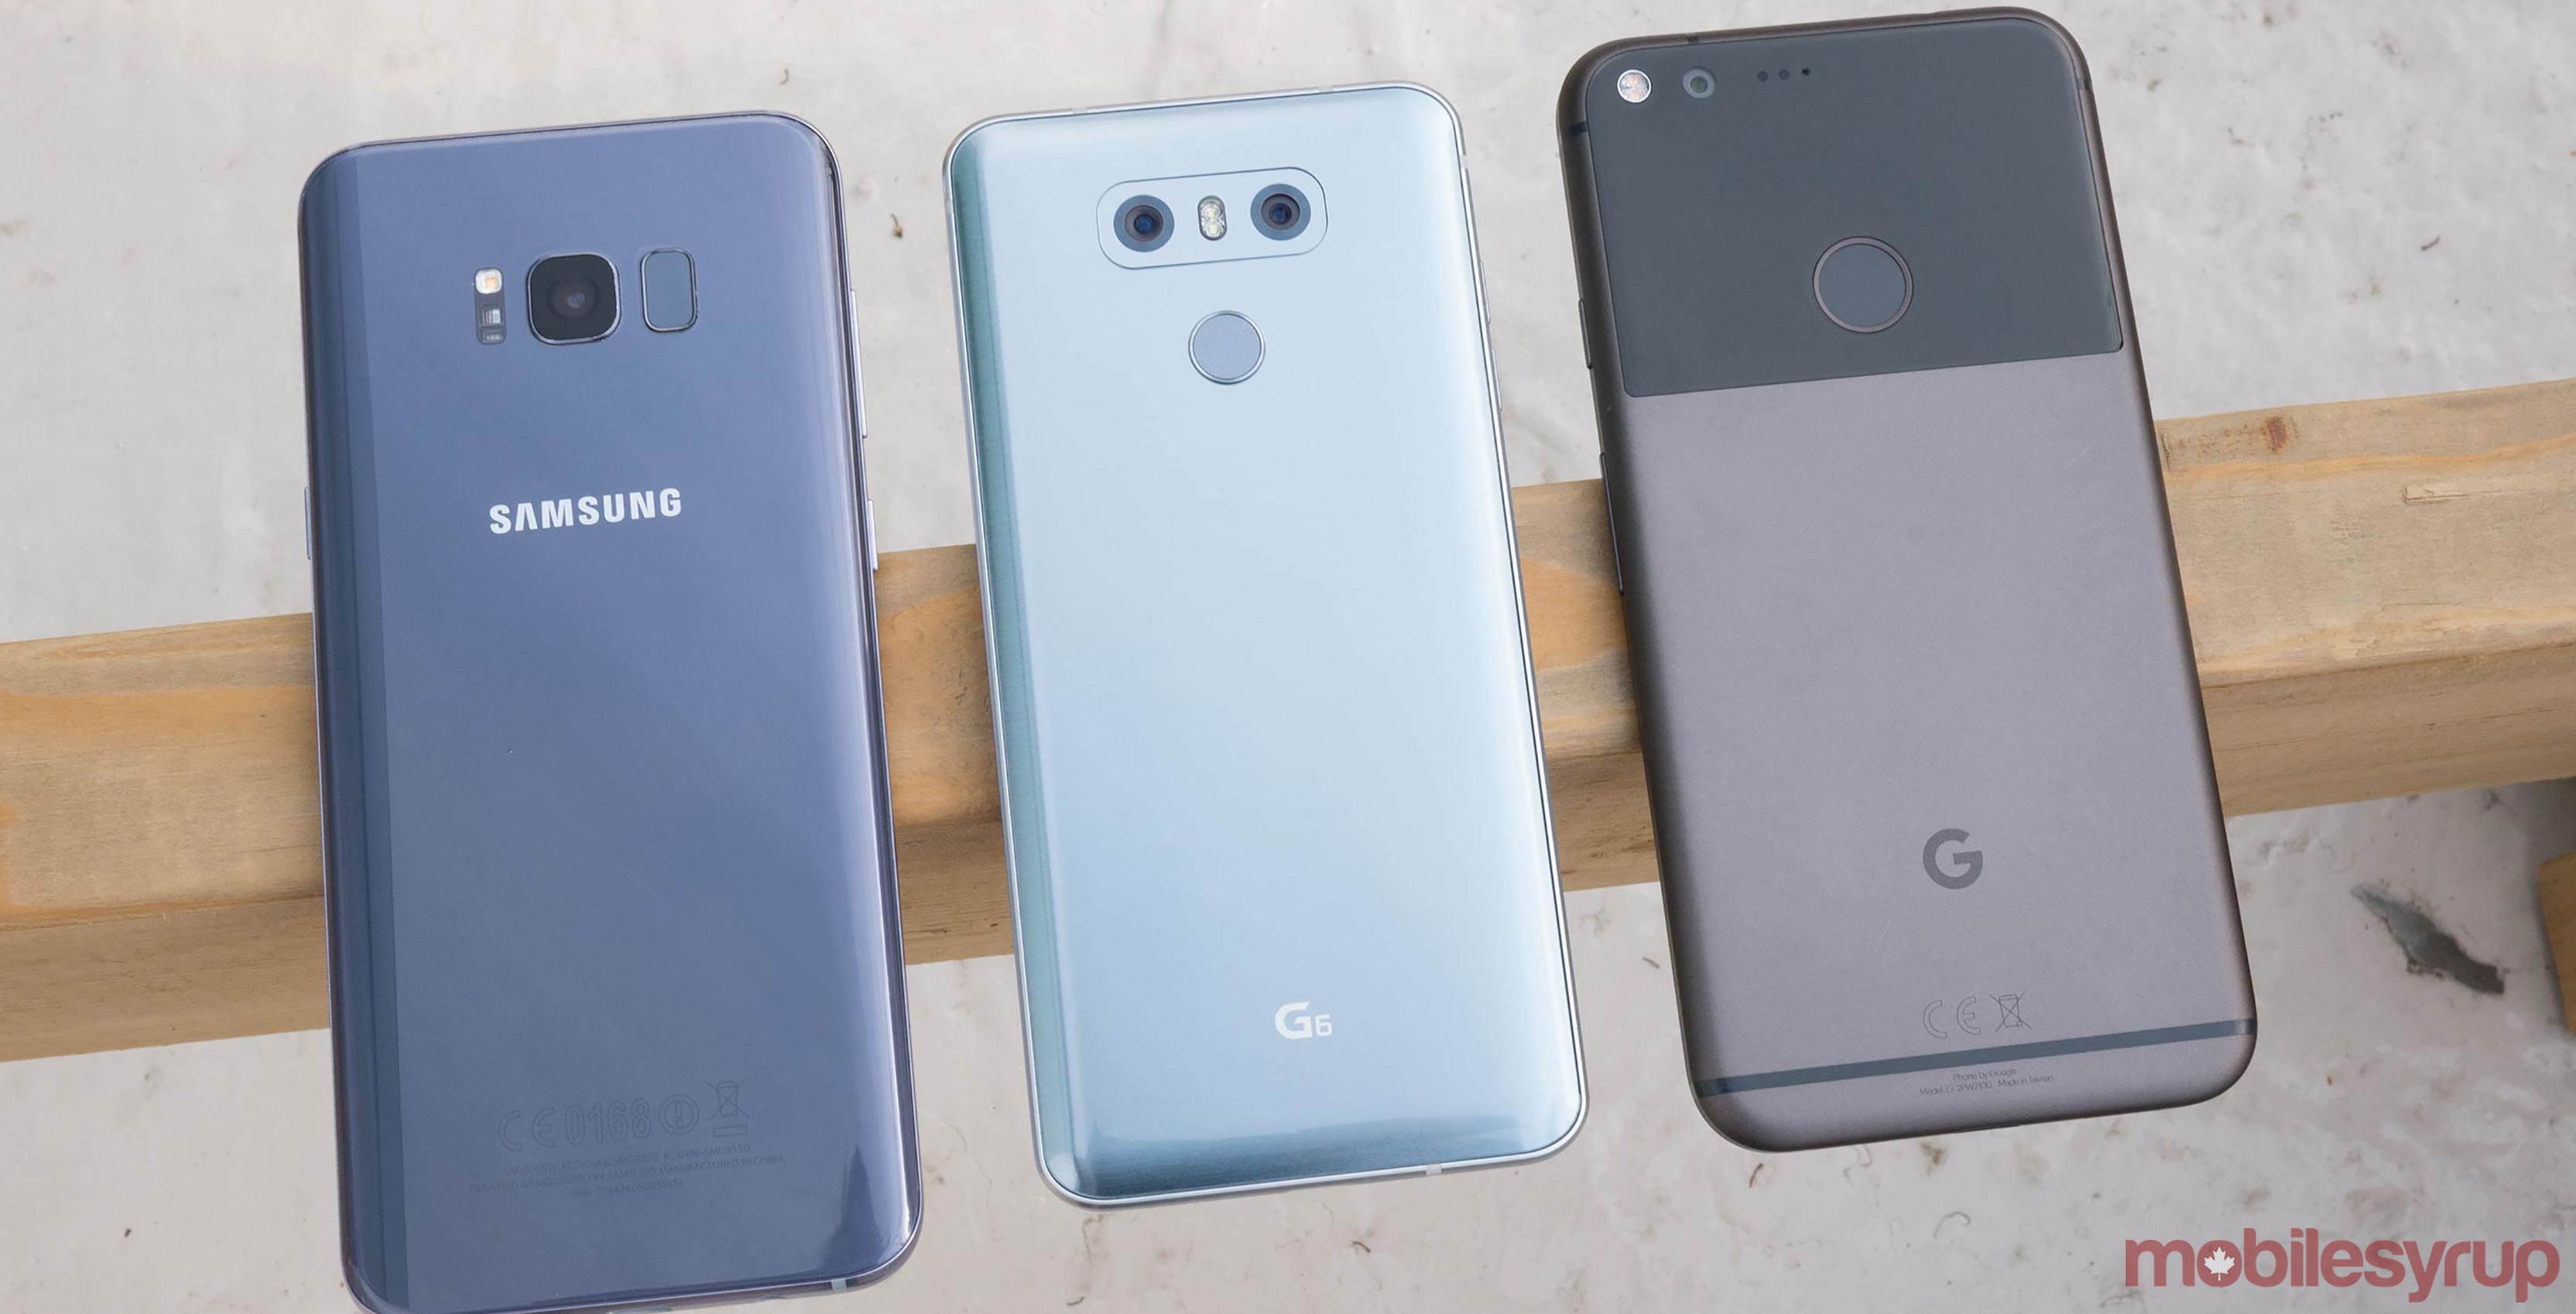 The Galaxy S8, LG G6 and Google Pixel XL all next to one another